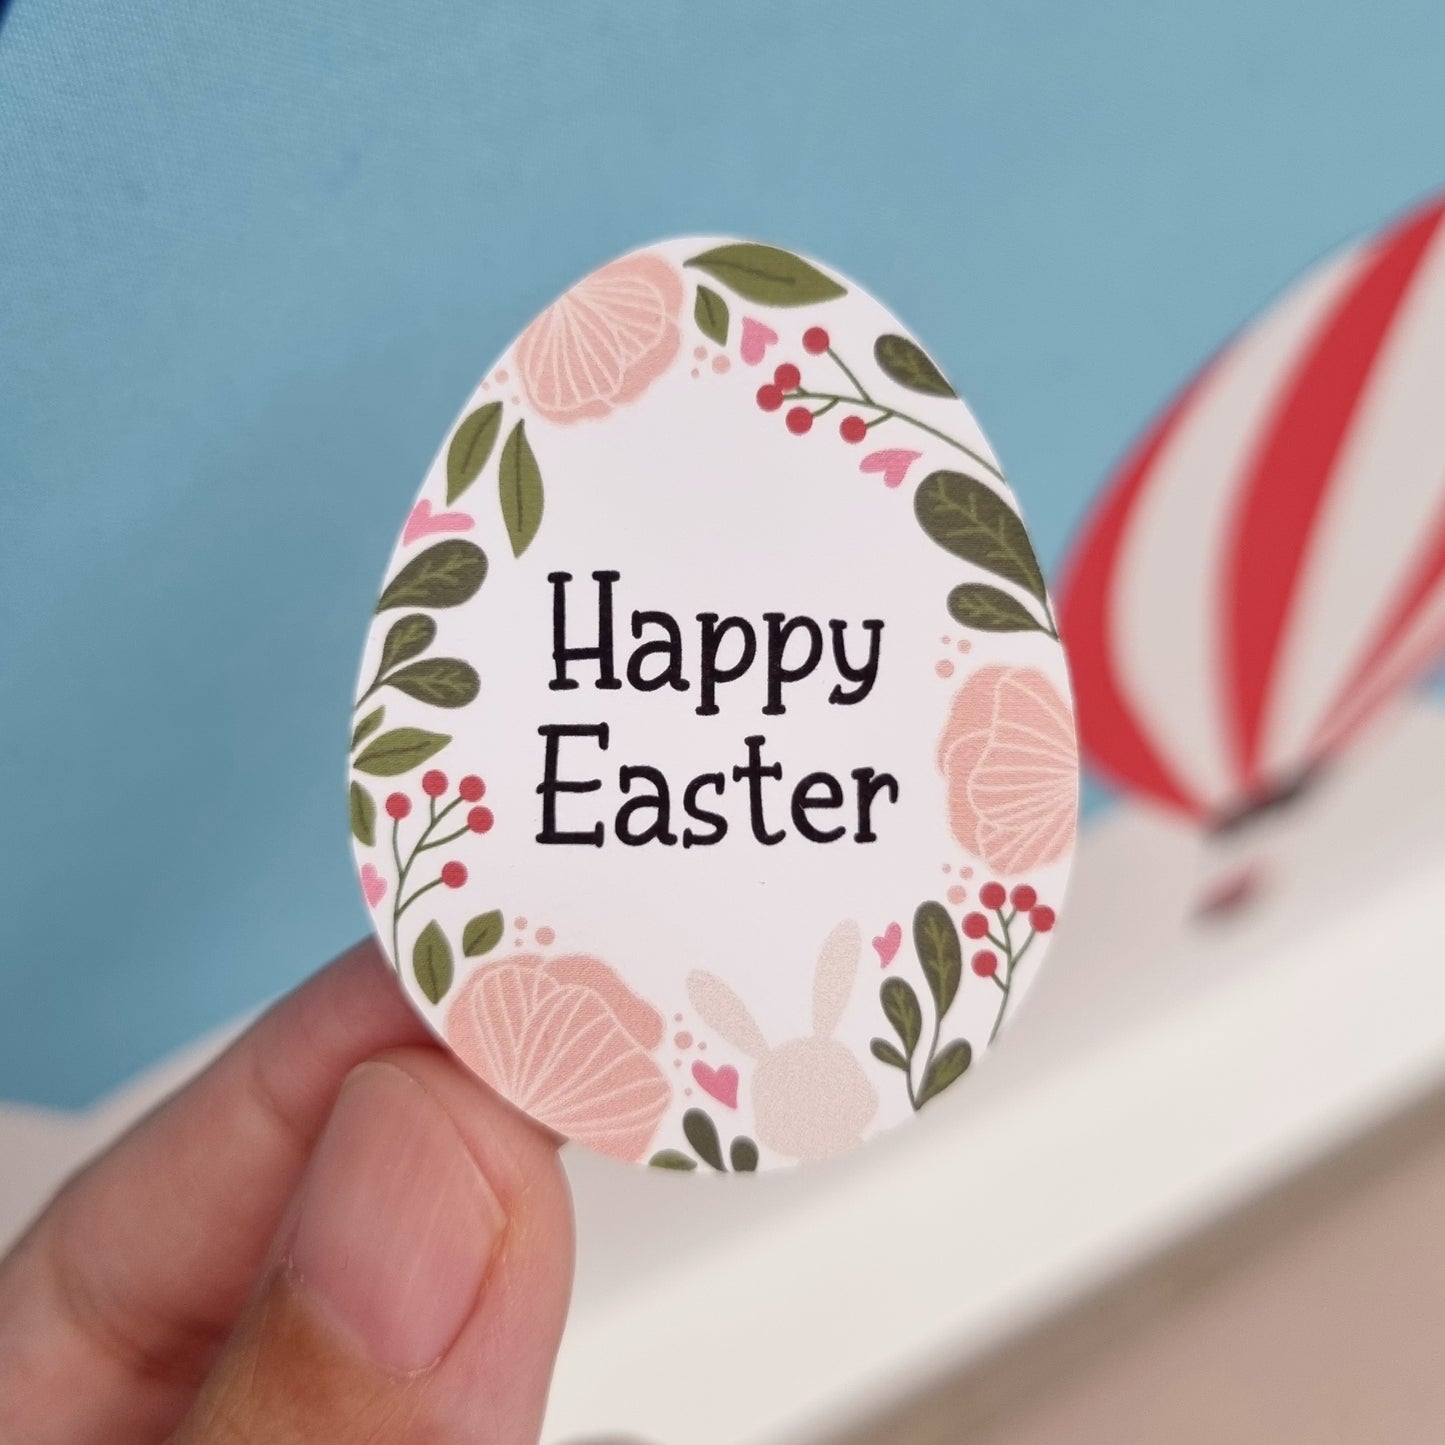 Personalised Gift Stickers - Cute Floral Easter Egg Gift Stickers